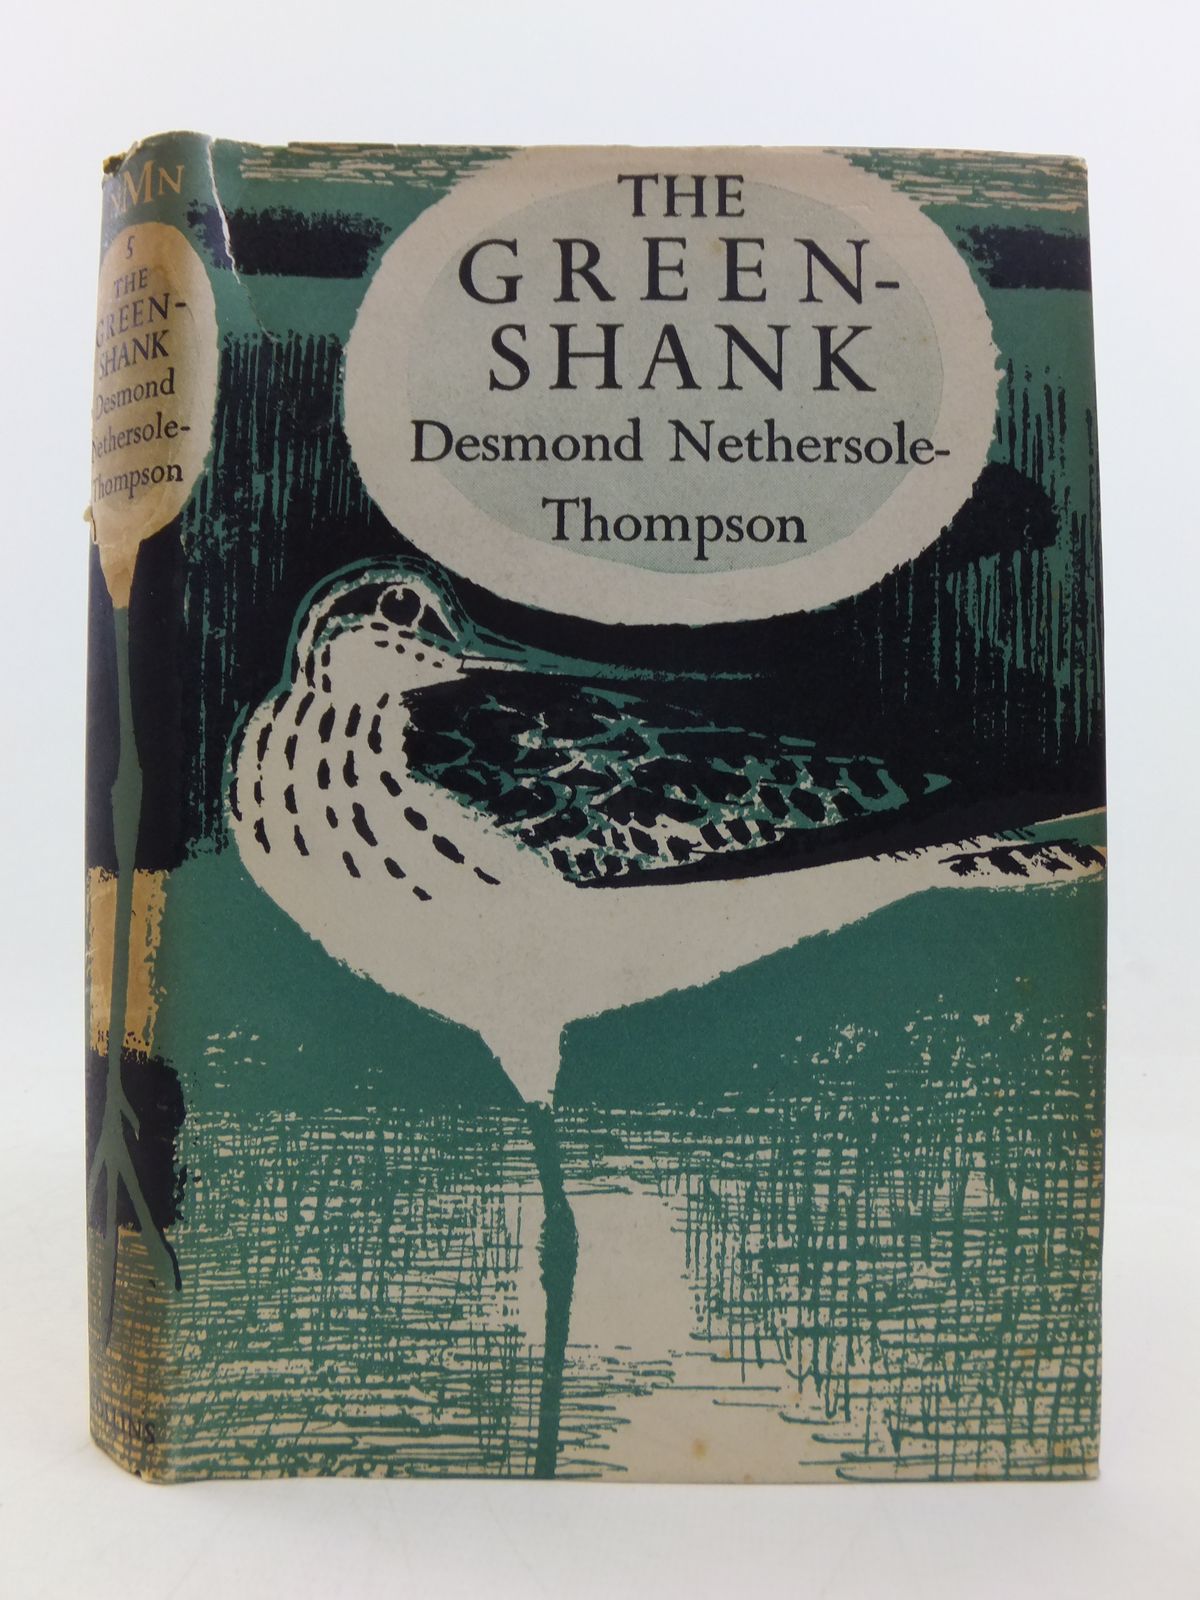 Photo of THE GREENSHANK (NMN 5) written by Nethersole-Thompson, Desmond published by Collins (STOCK CODE: 1808720)  for sale by Stella & Rose's Books